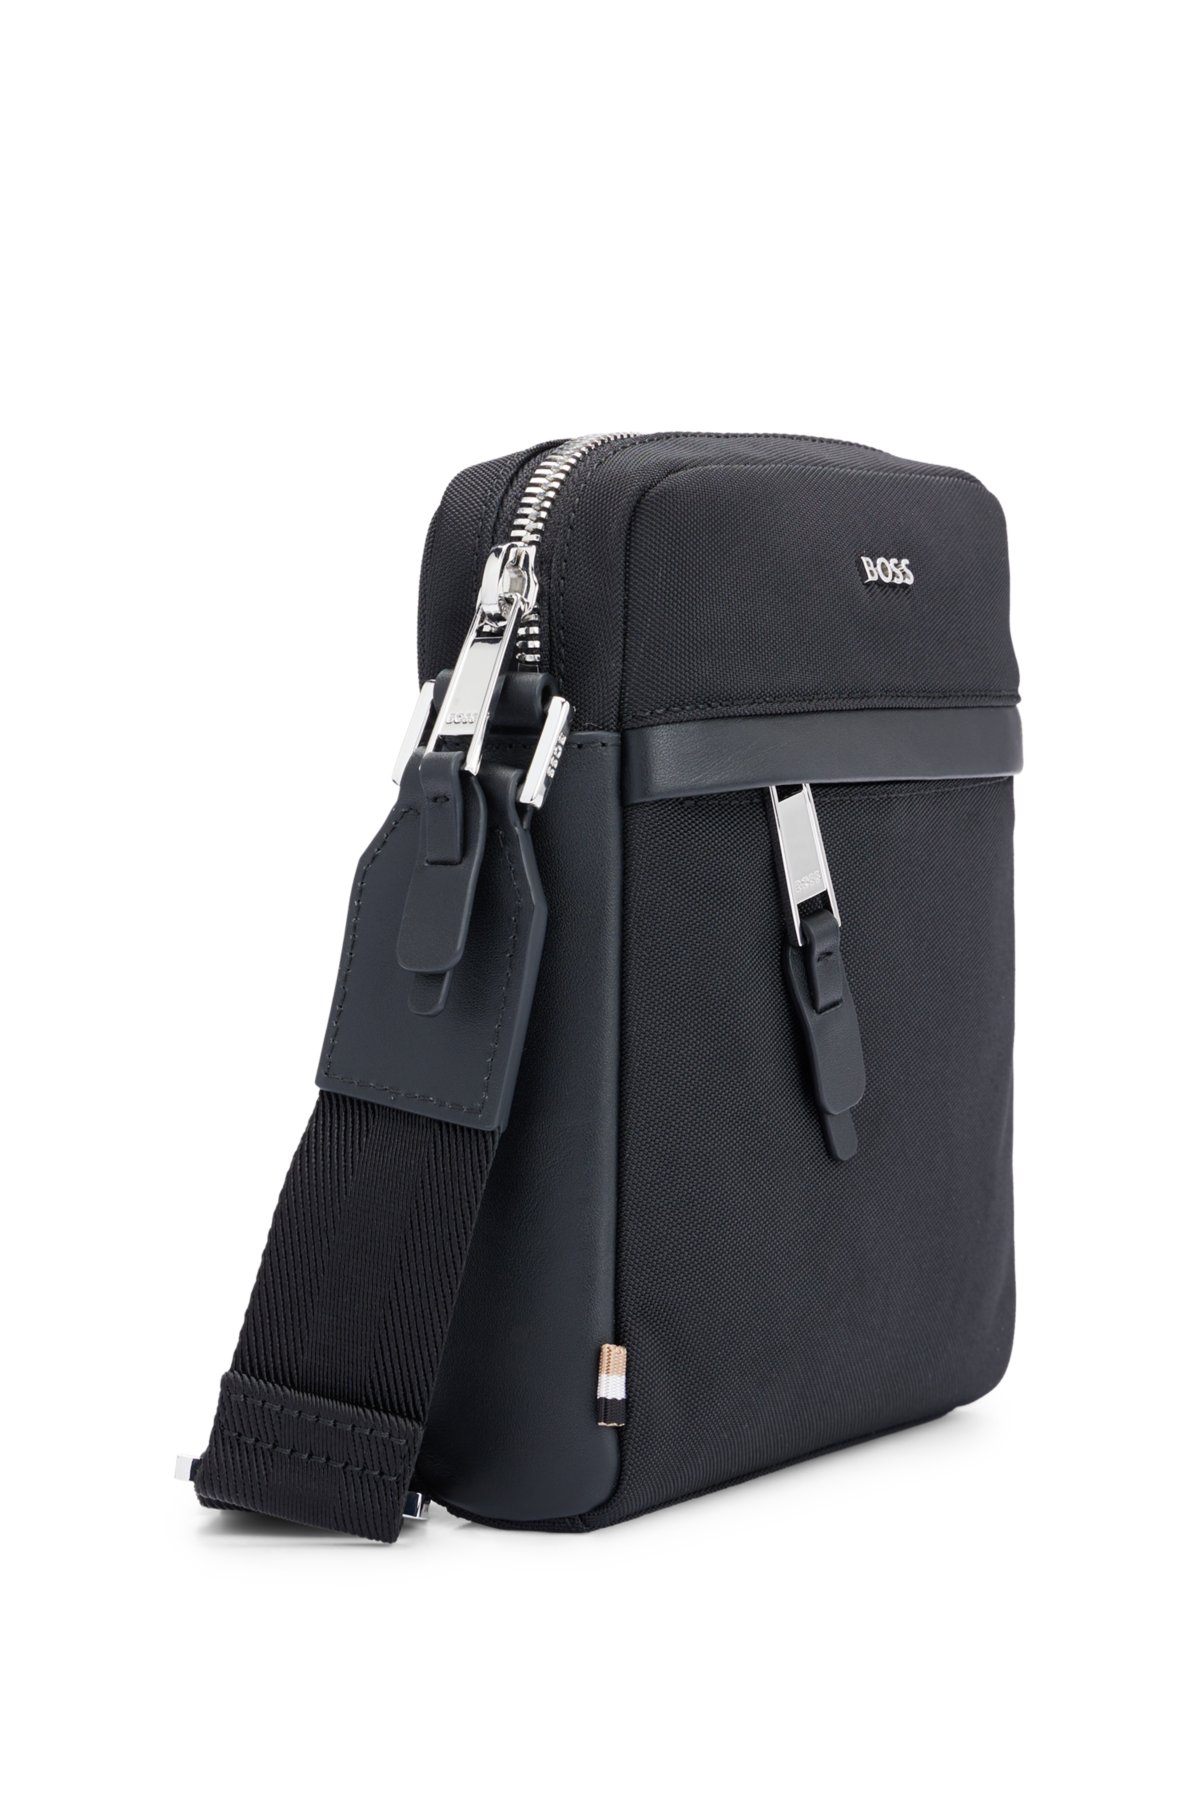 BOSS logo - Structured-material reporter bag with lettering